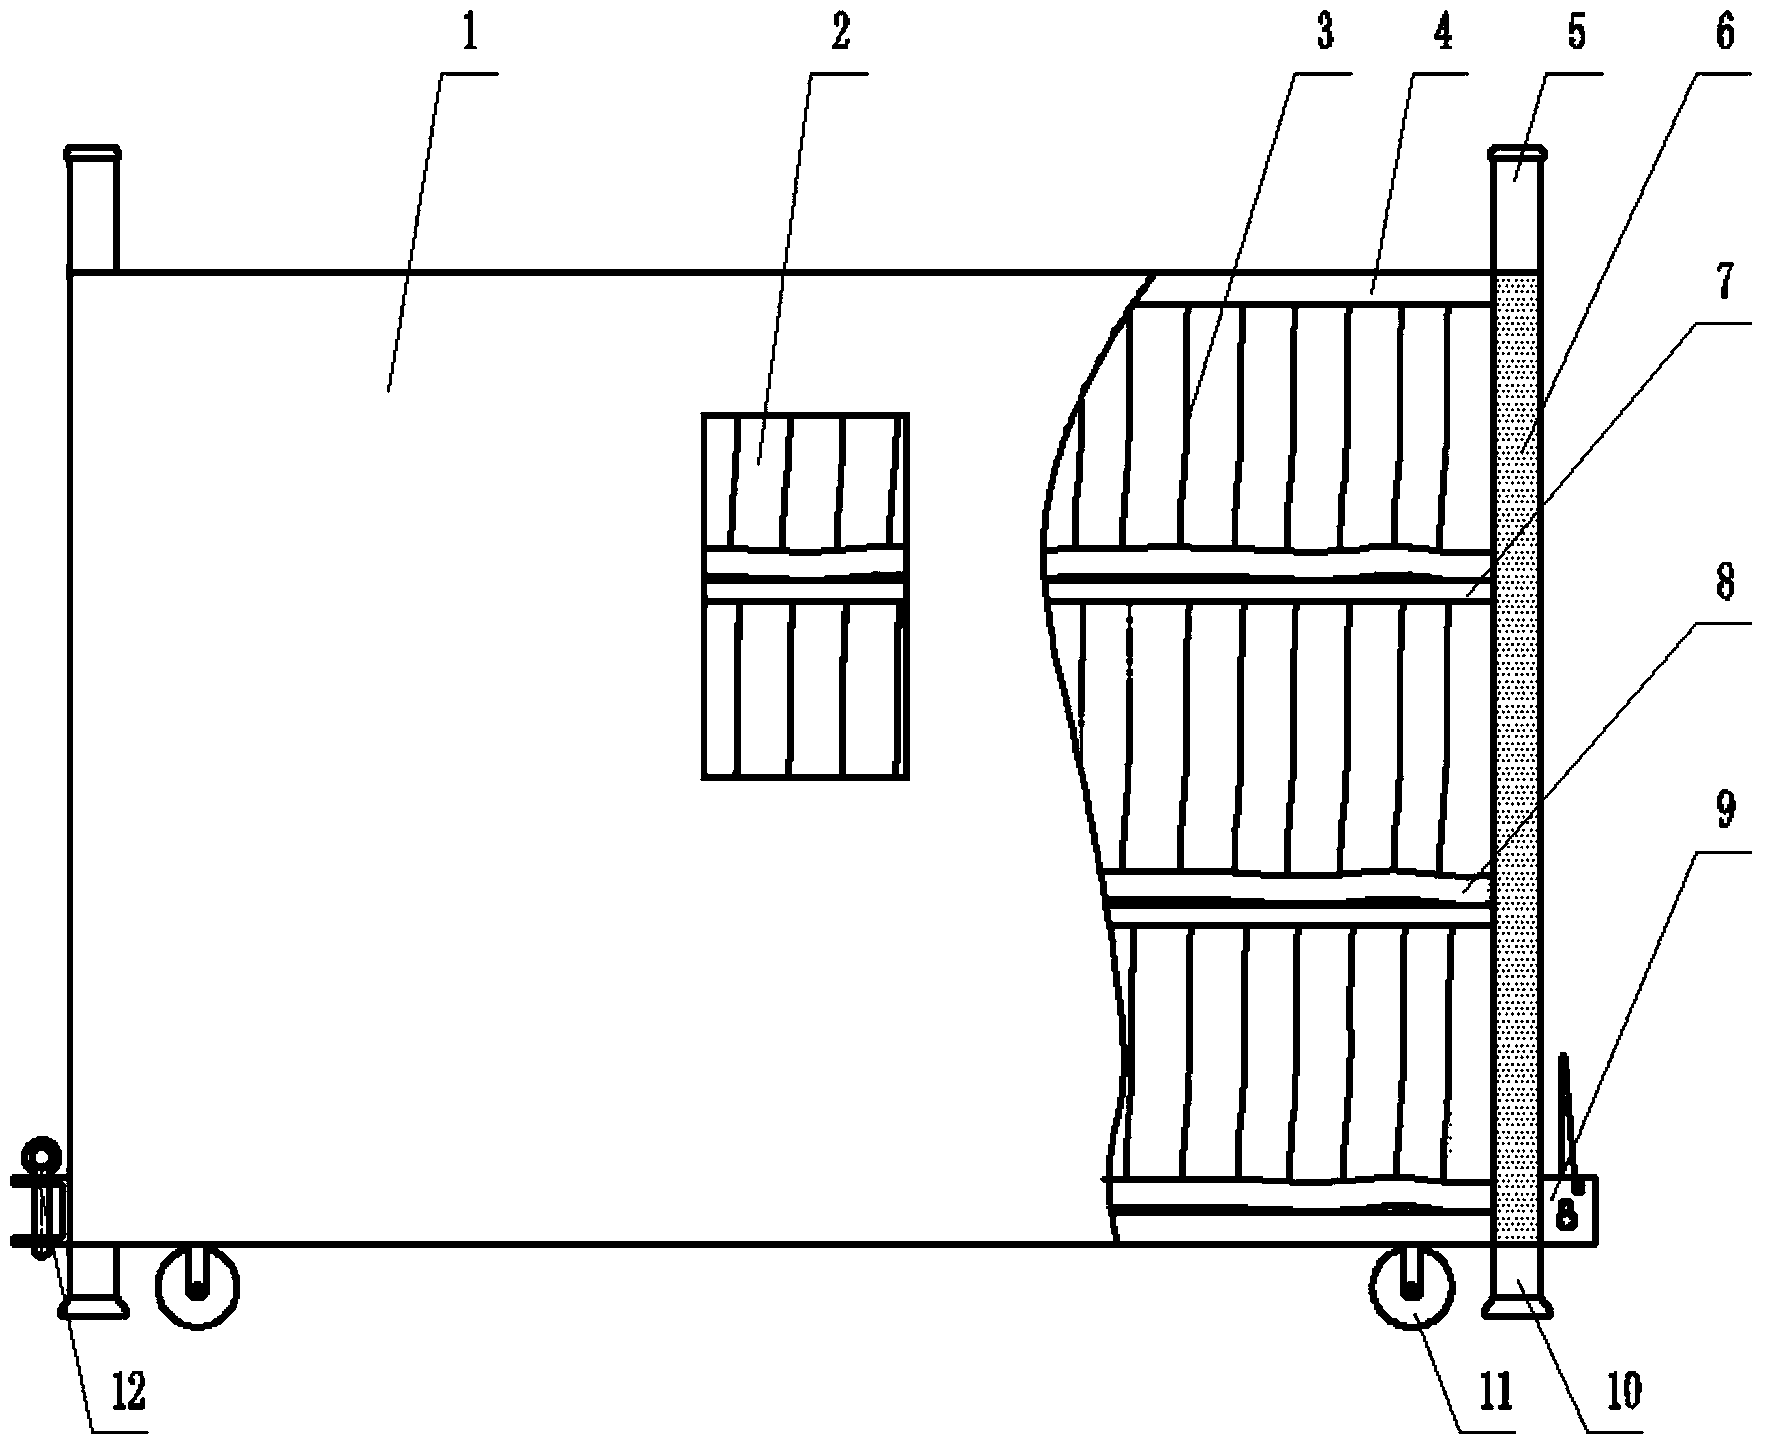 Transferring vehicle of engine hoods of automobile